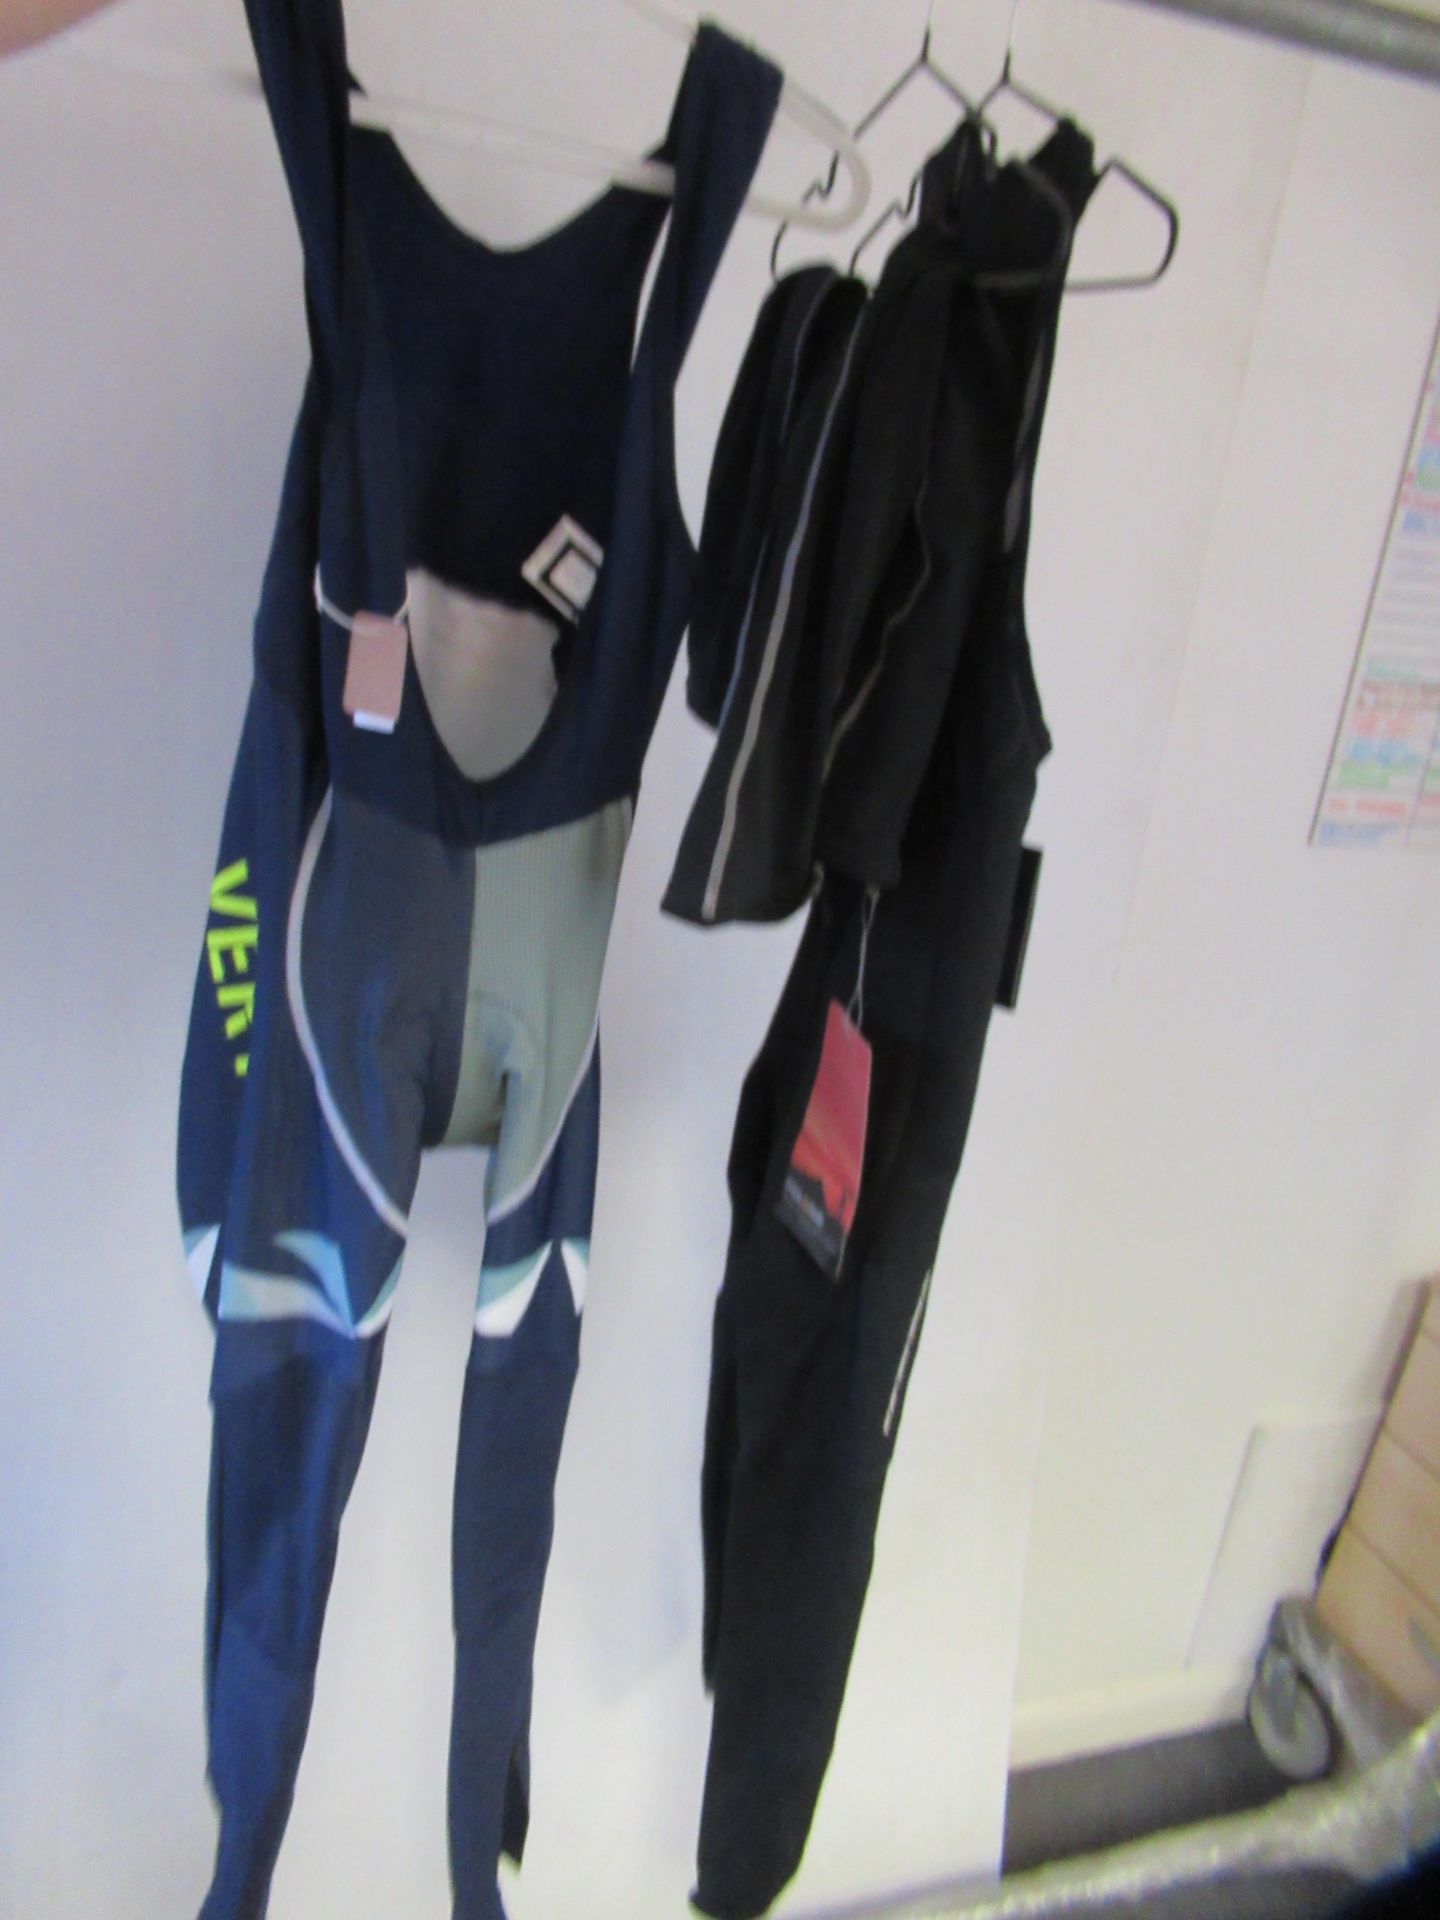 S Male Cycling Clothes - Image 2 of 4